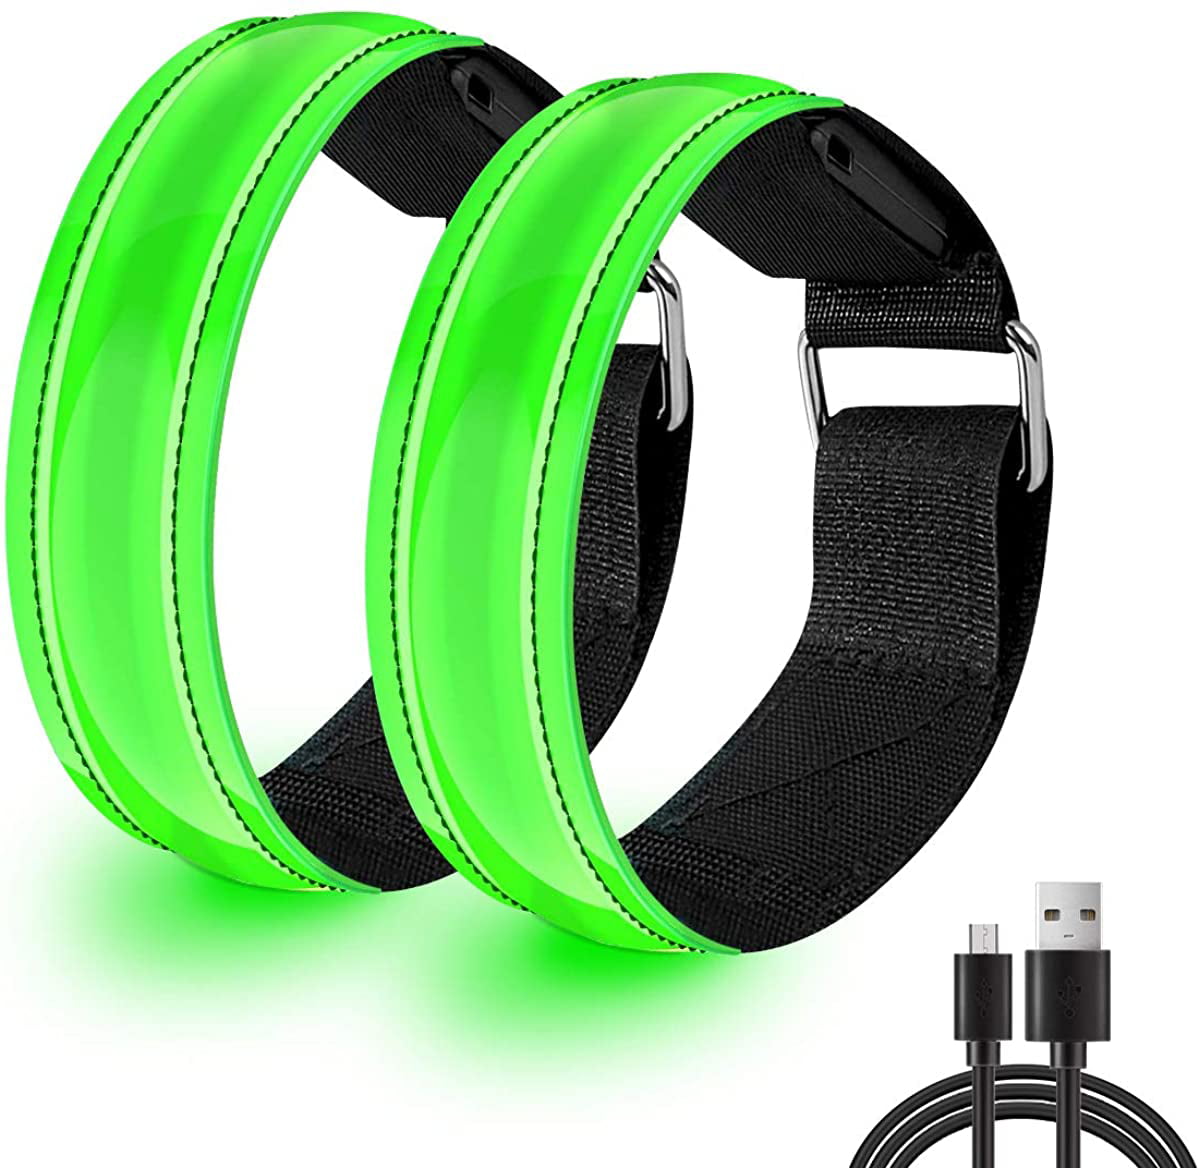 Bright LED Arm Bands for Running Dog Walkers Child Safety ** Cycling 